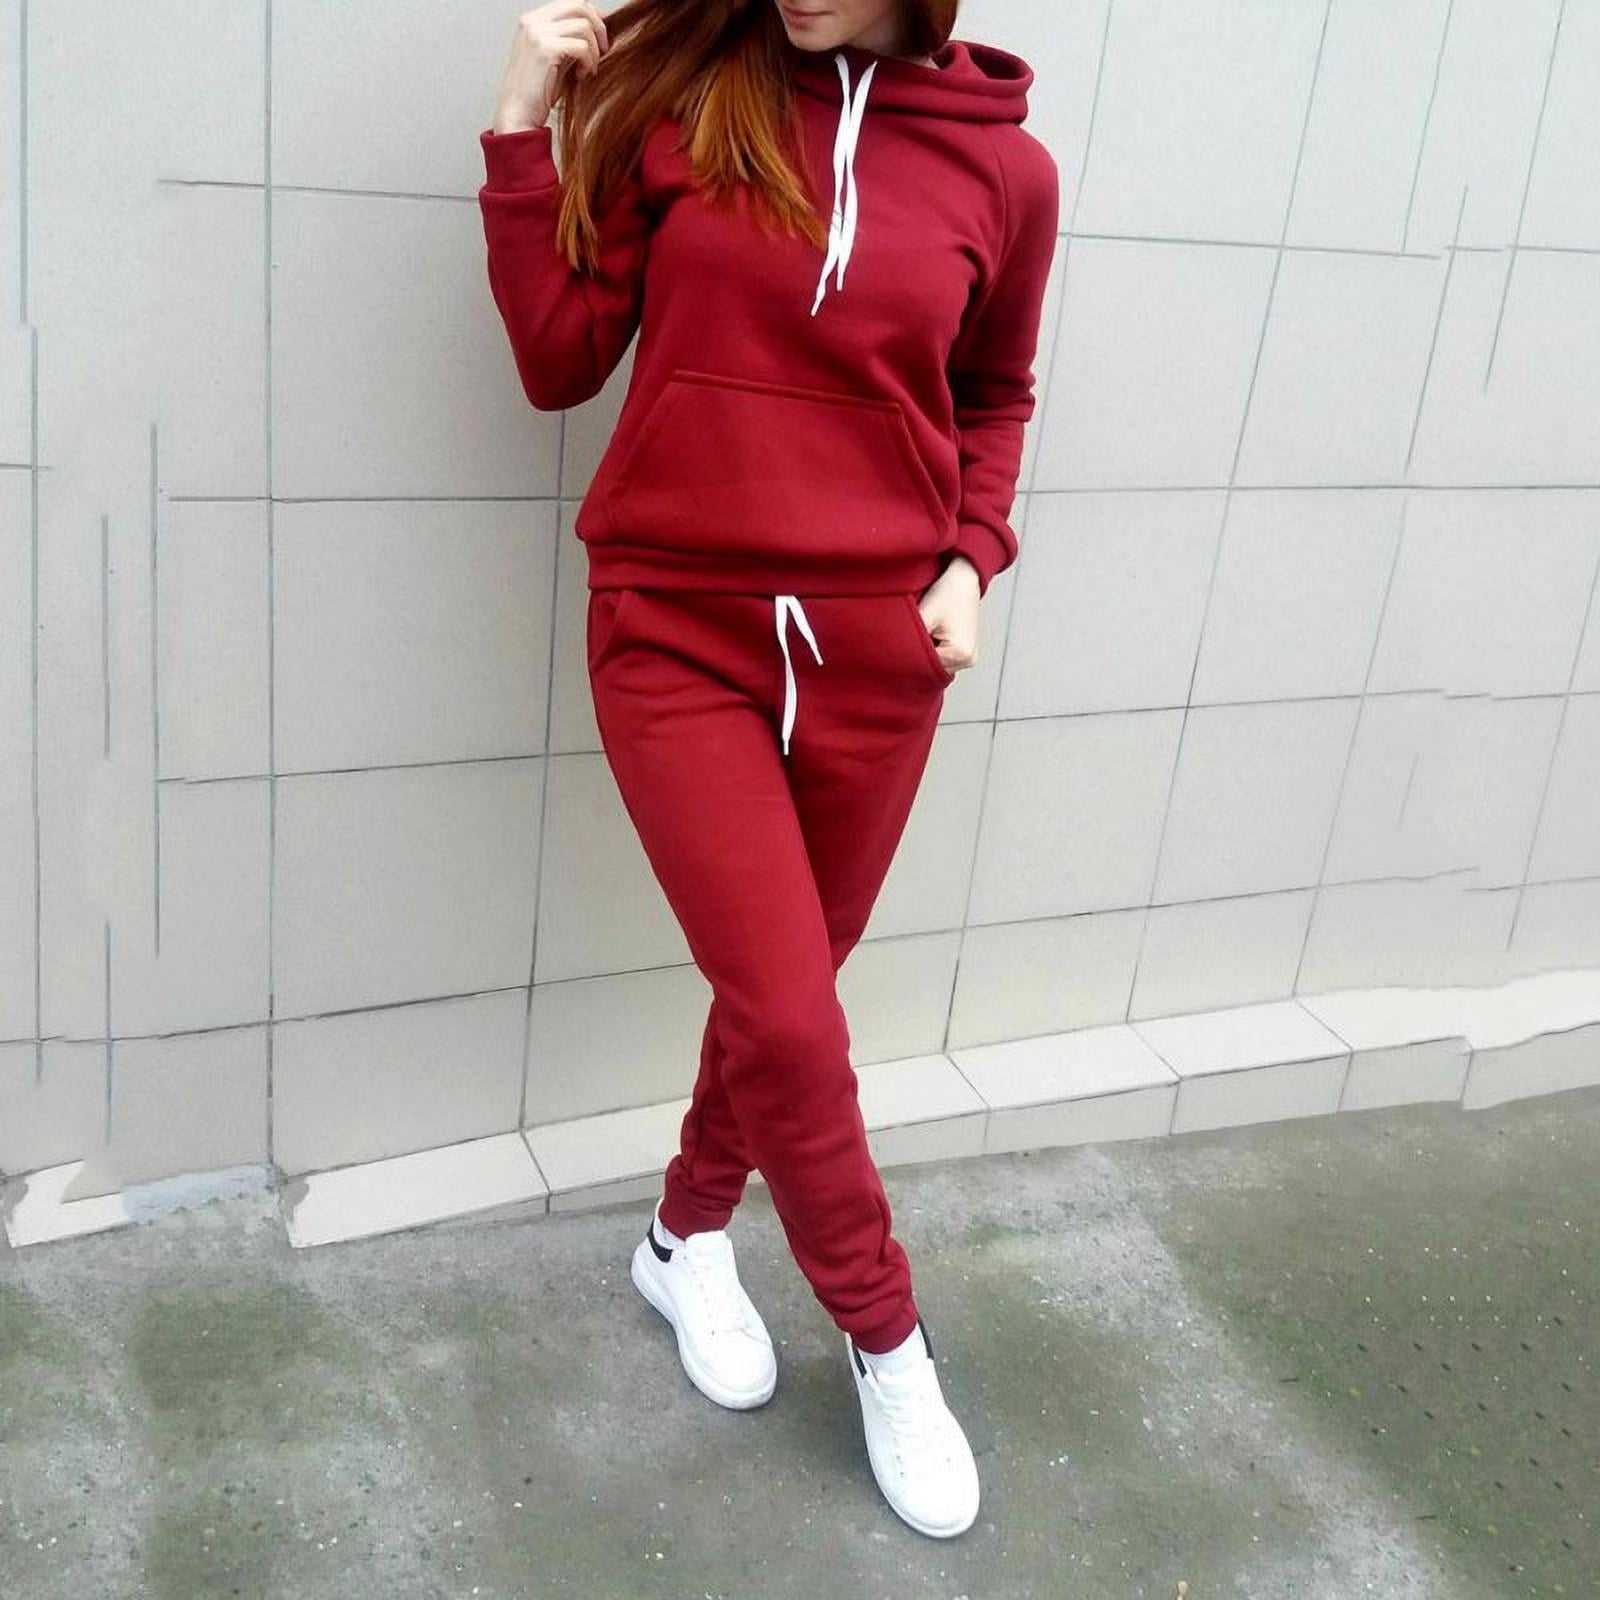 Sporty New Women's Zipper Long Sleeves Color Patchwork Casual Pants Set Outfits 